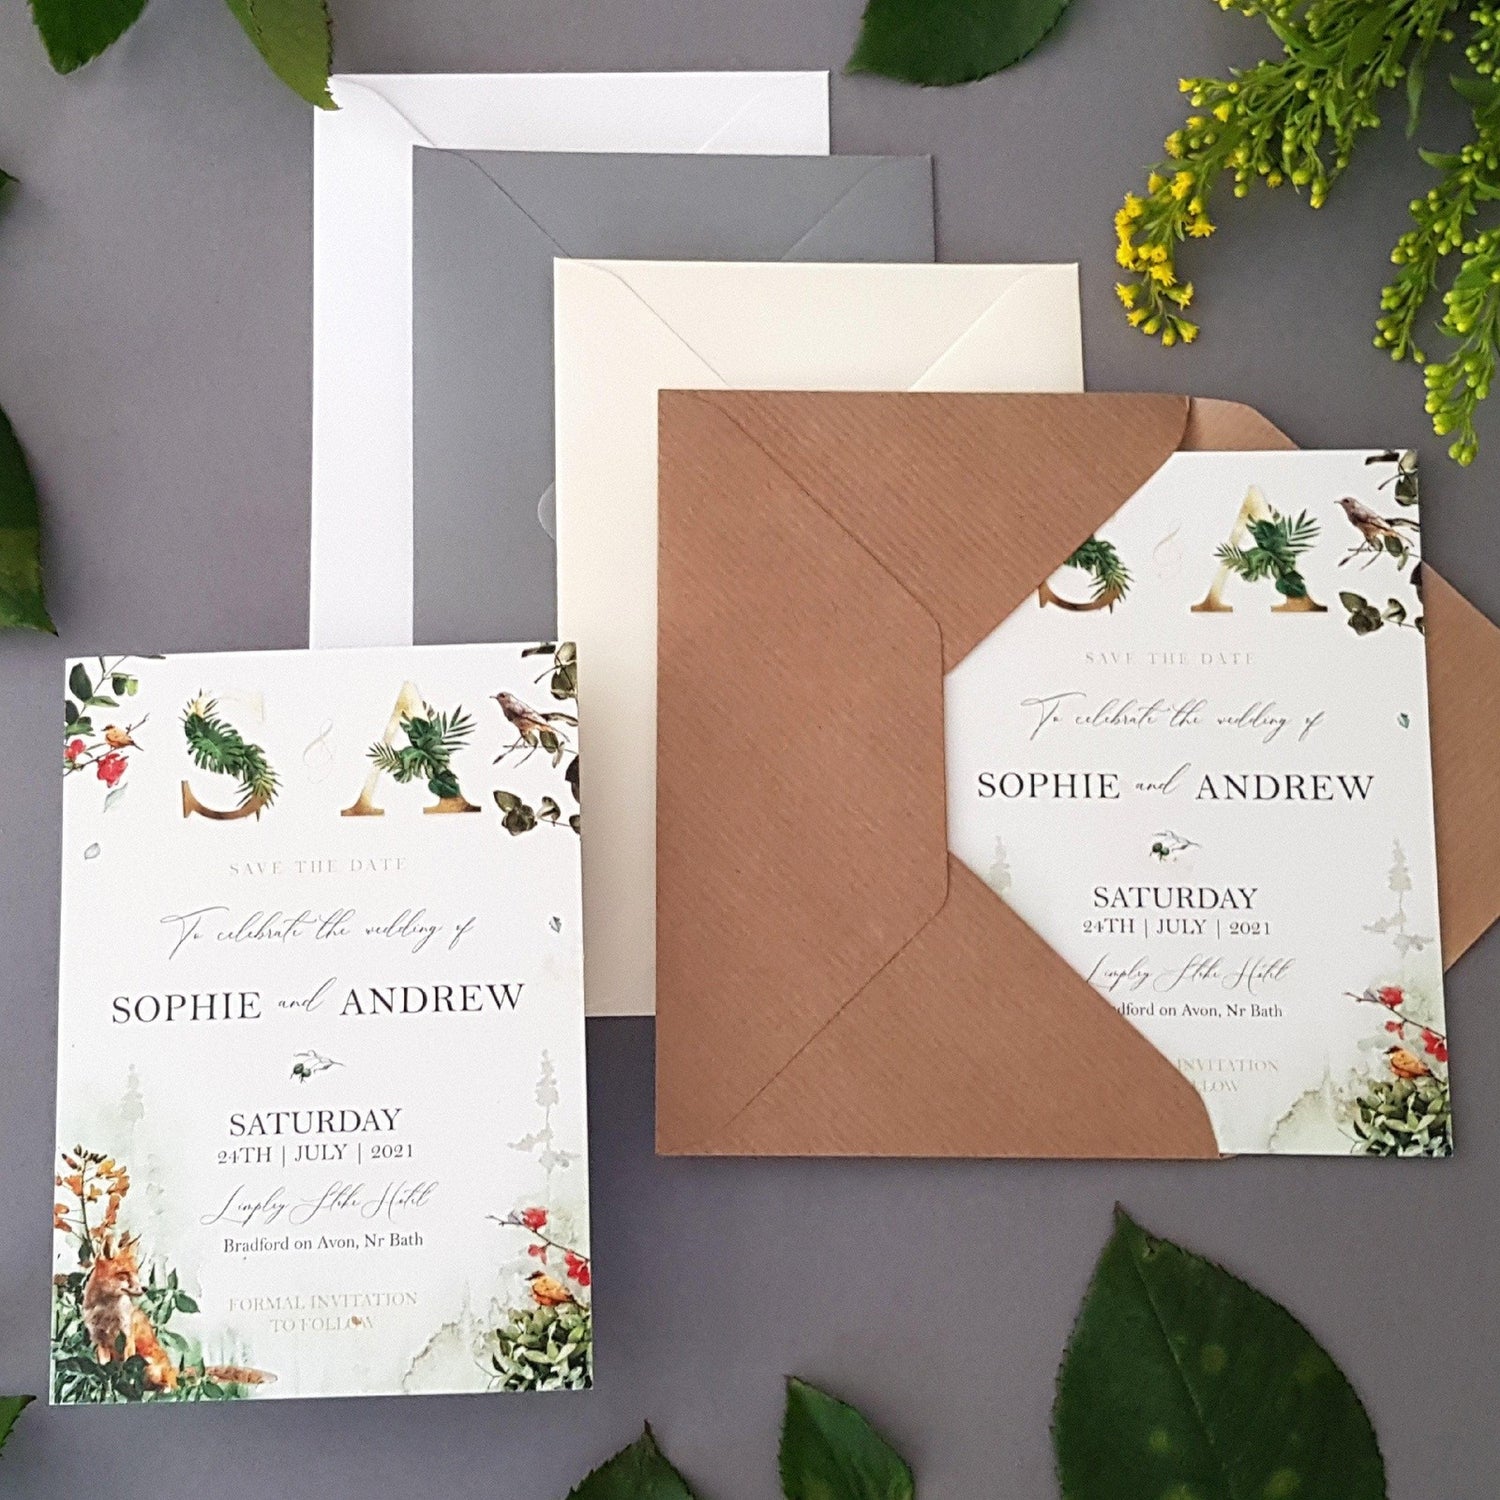 Woodland Save the Date Cards